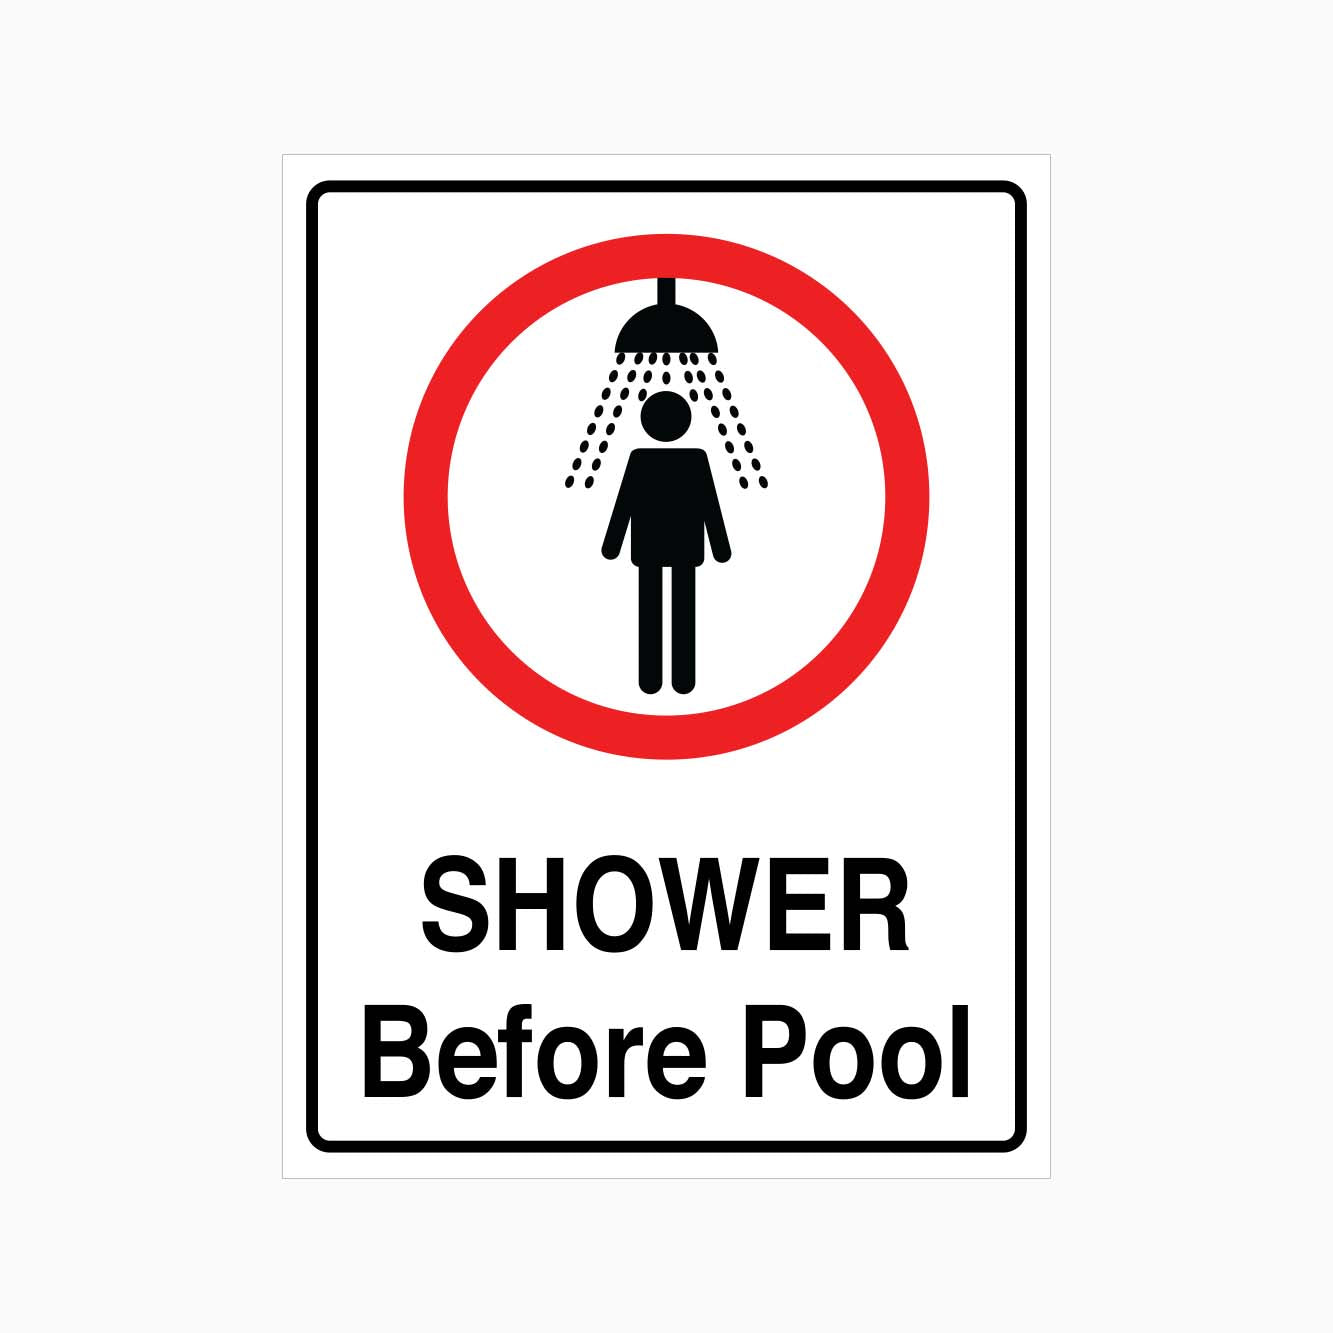 SHOWER BEFORE POOL SIGN - GET SIGNS